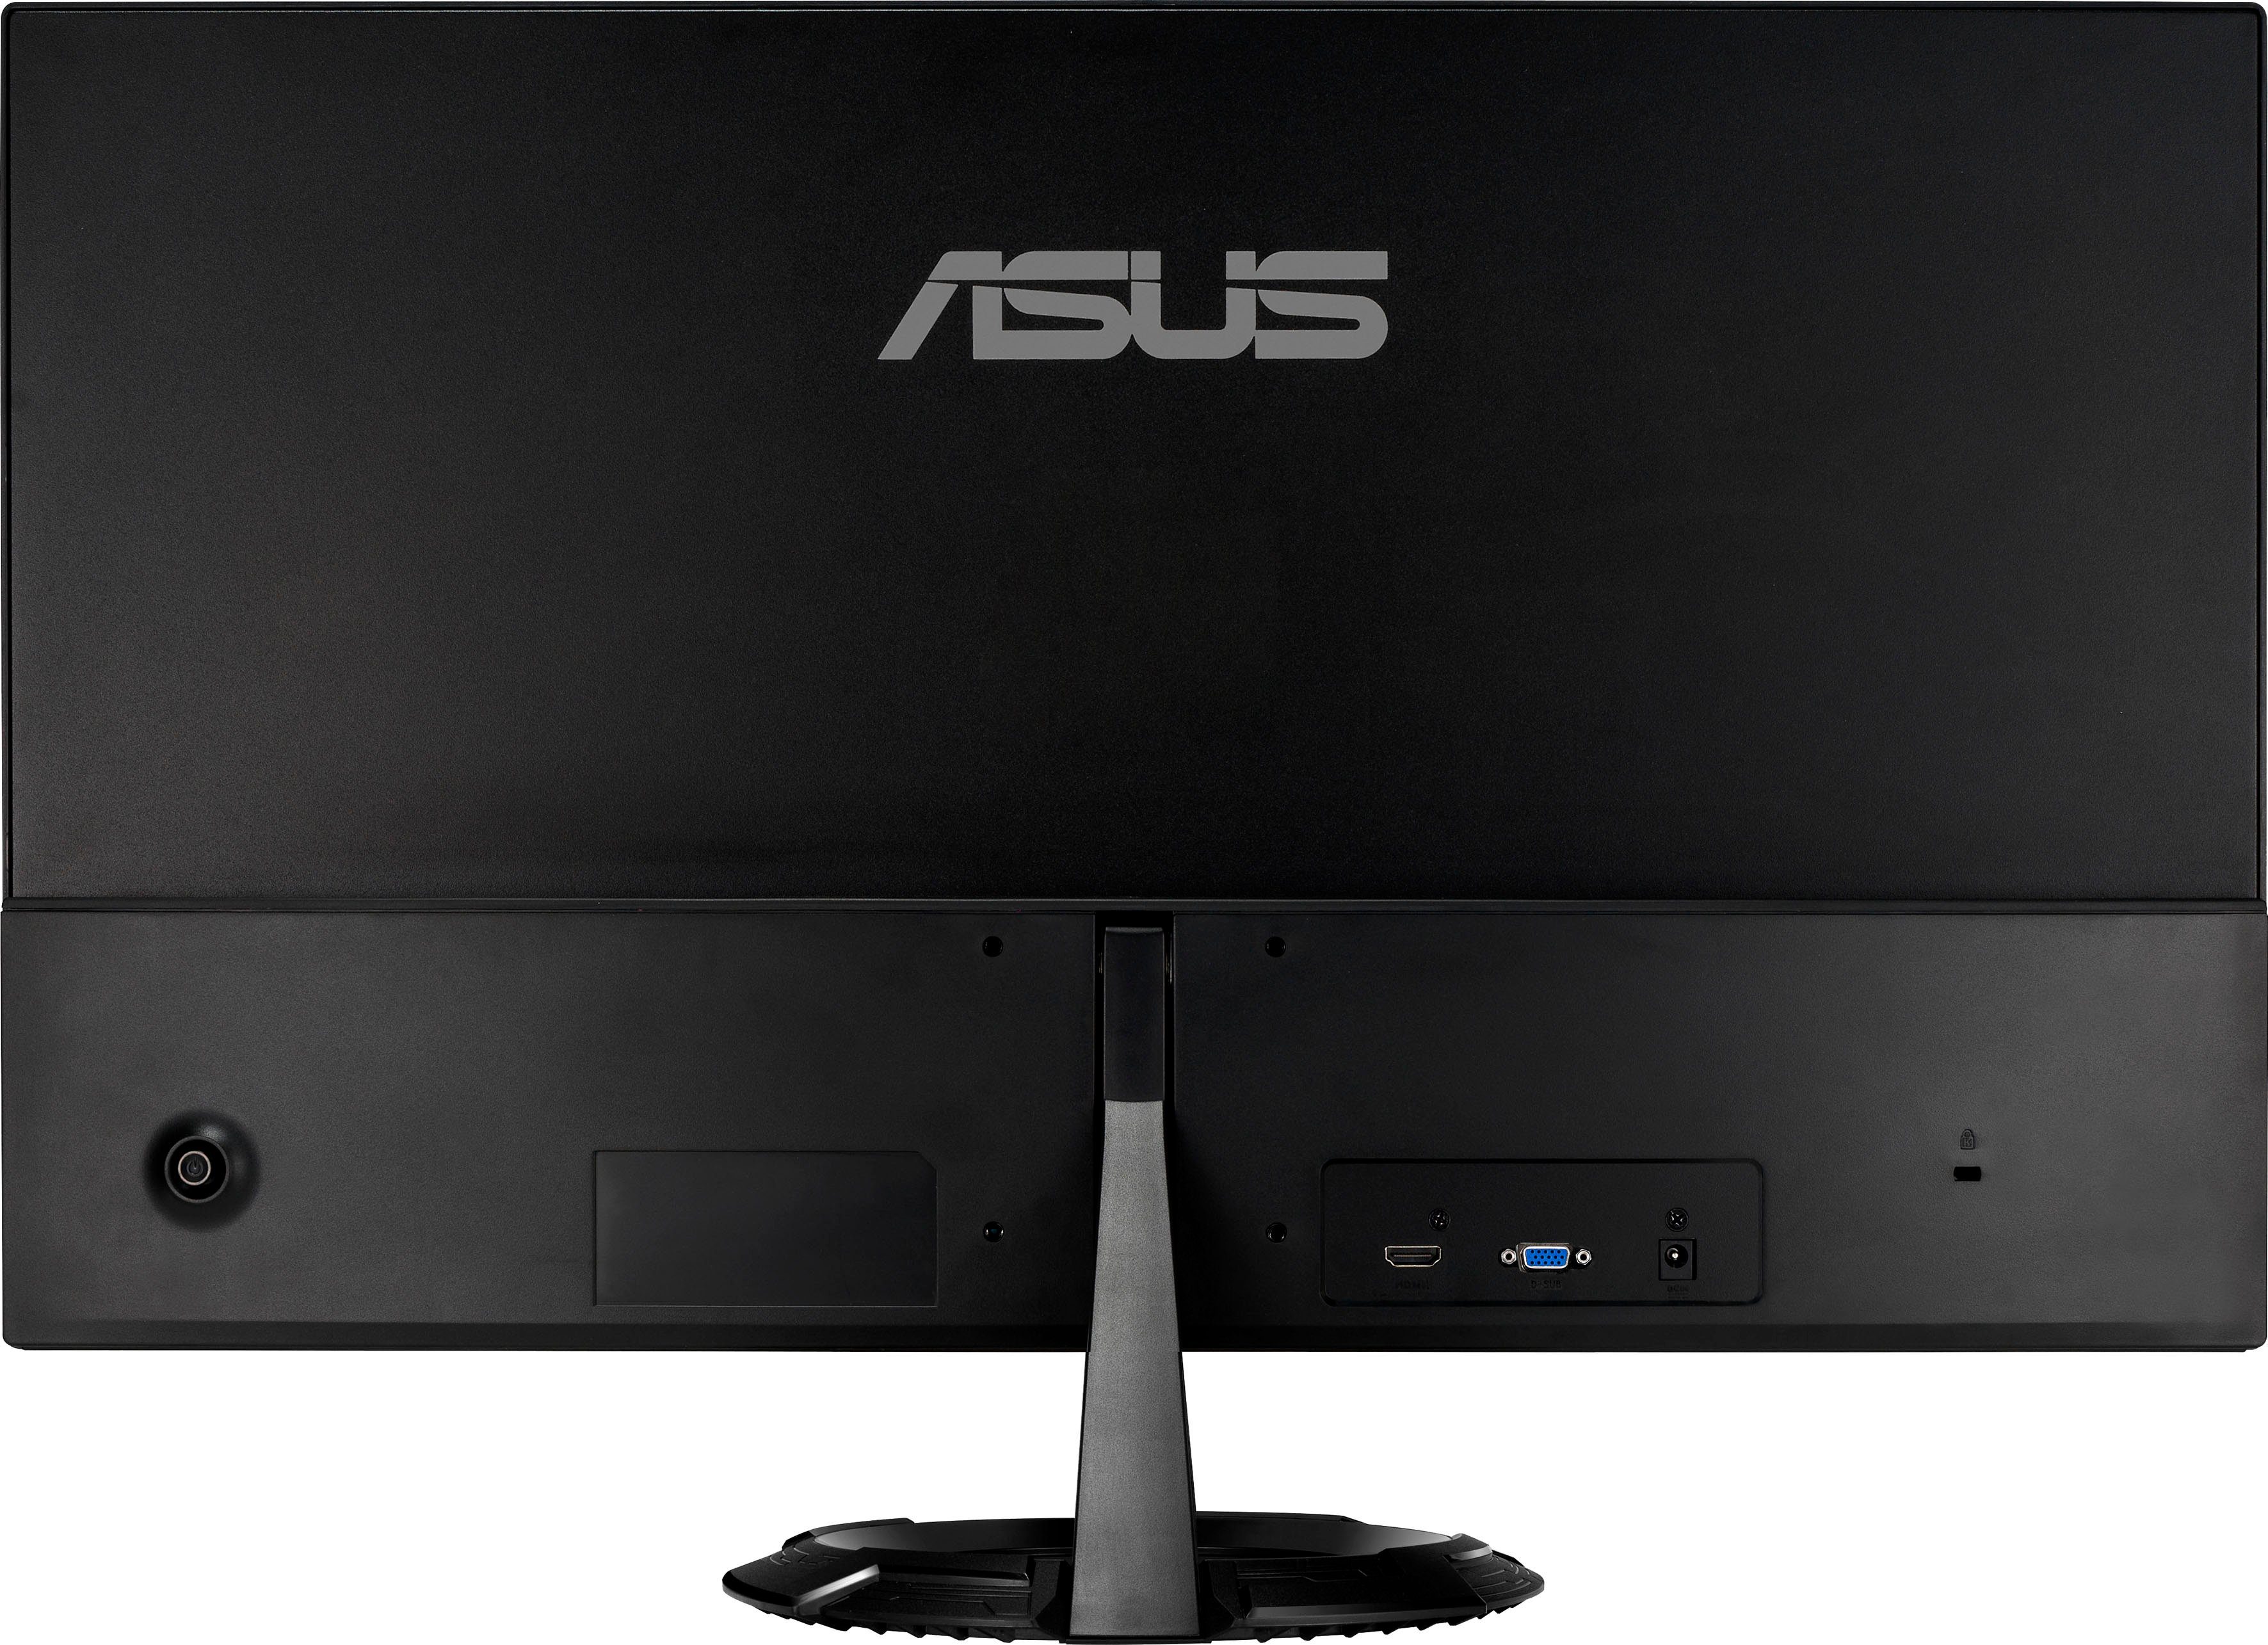 ", HD, 1920 Hz, IPS) Reaktionszeit, ms LED-Monitor (68,6 75 1080 1 x px, Full cm/27 Asus VZ279HEG1R